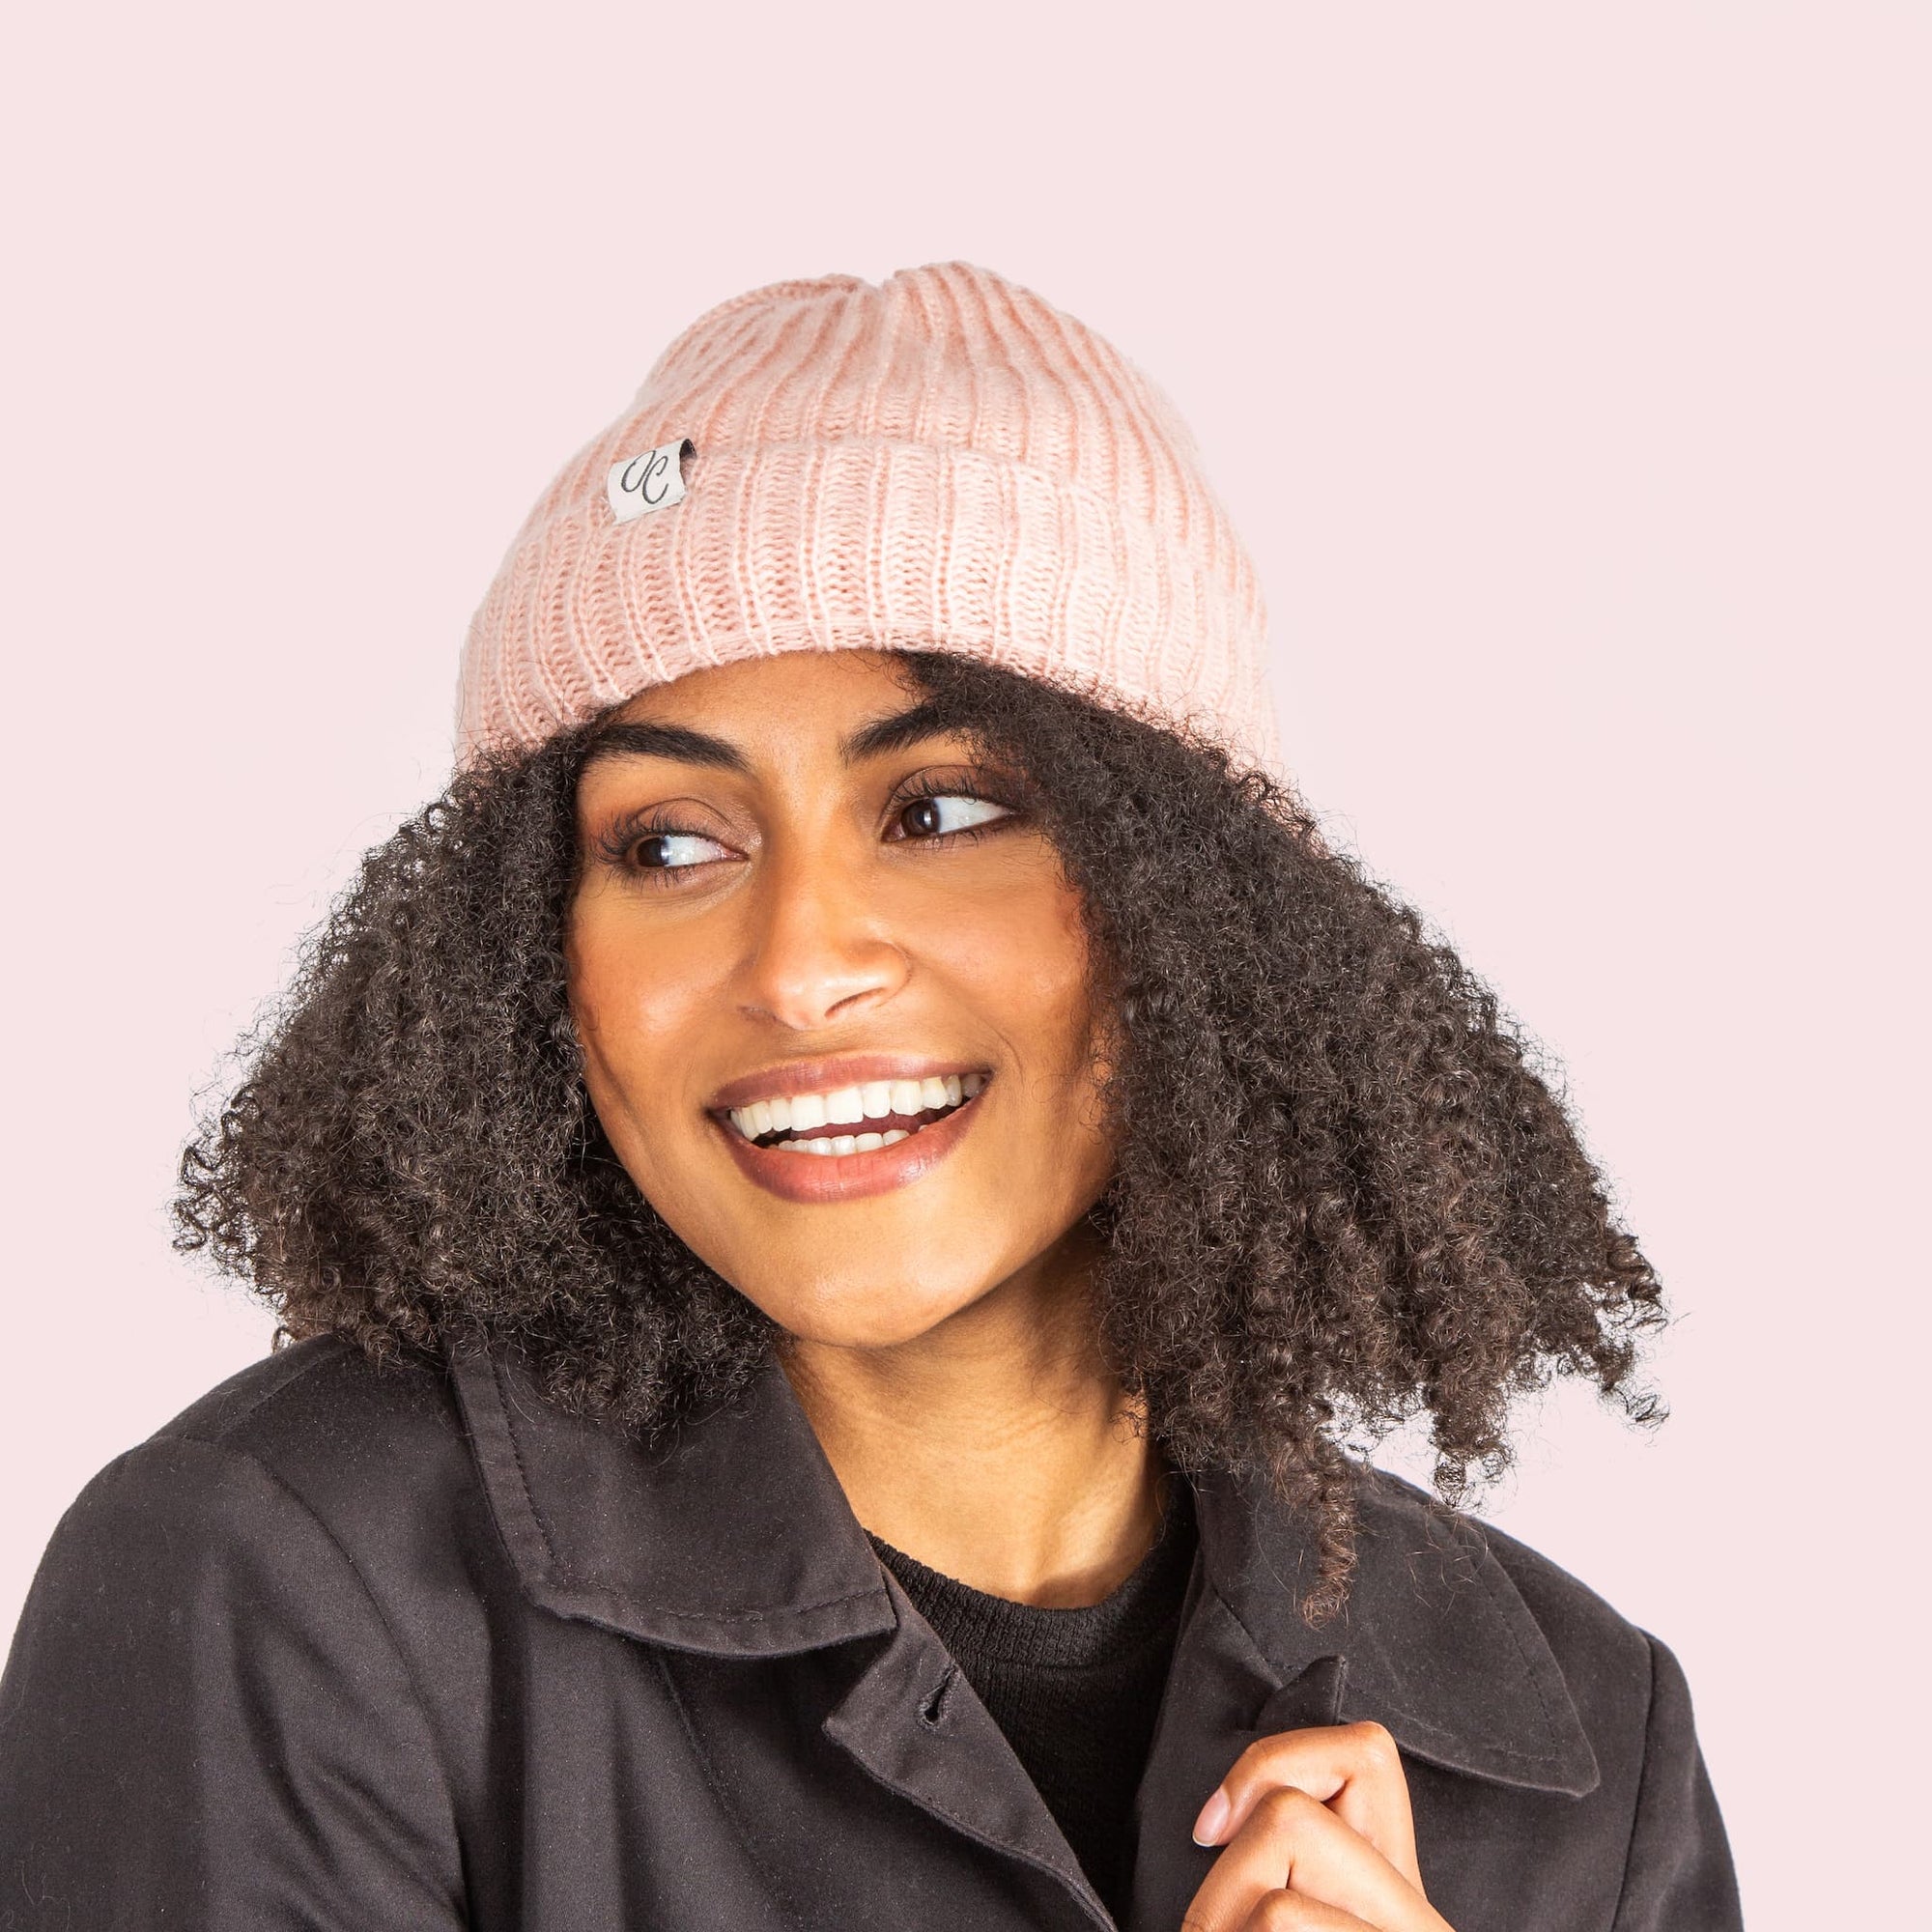 Only Curls Pink Satin Lined Knitted Beanie Hat